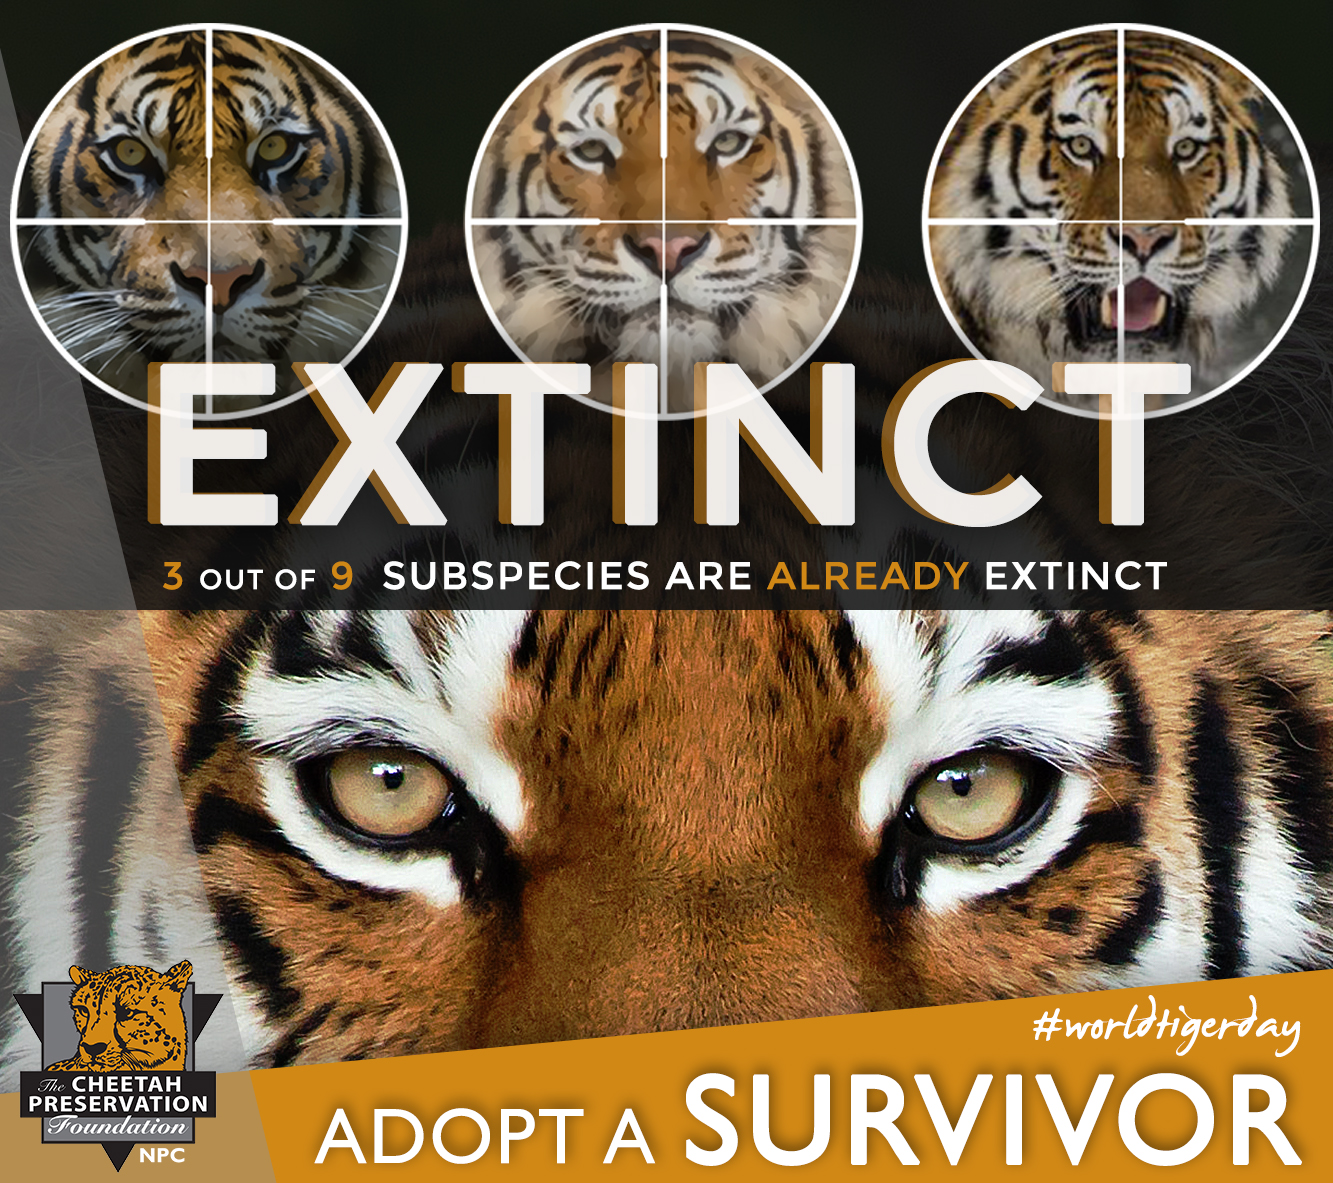 3 out of 9 subspecies are already extinct international tiger day